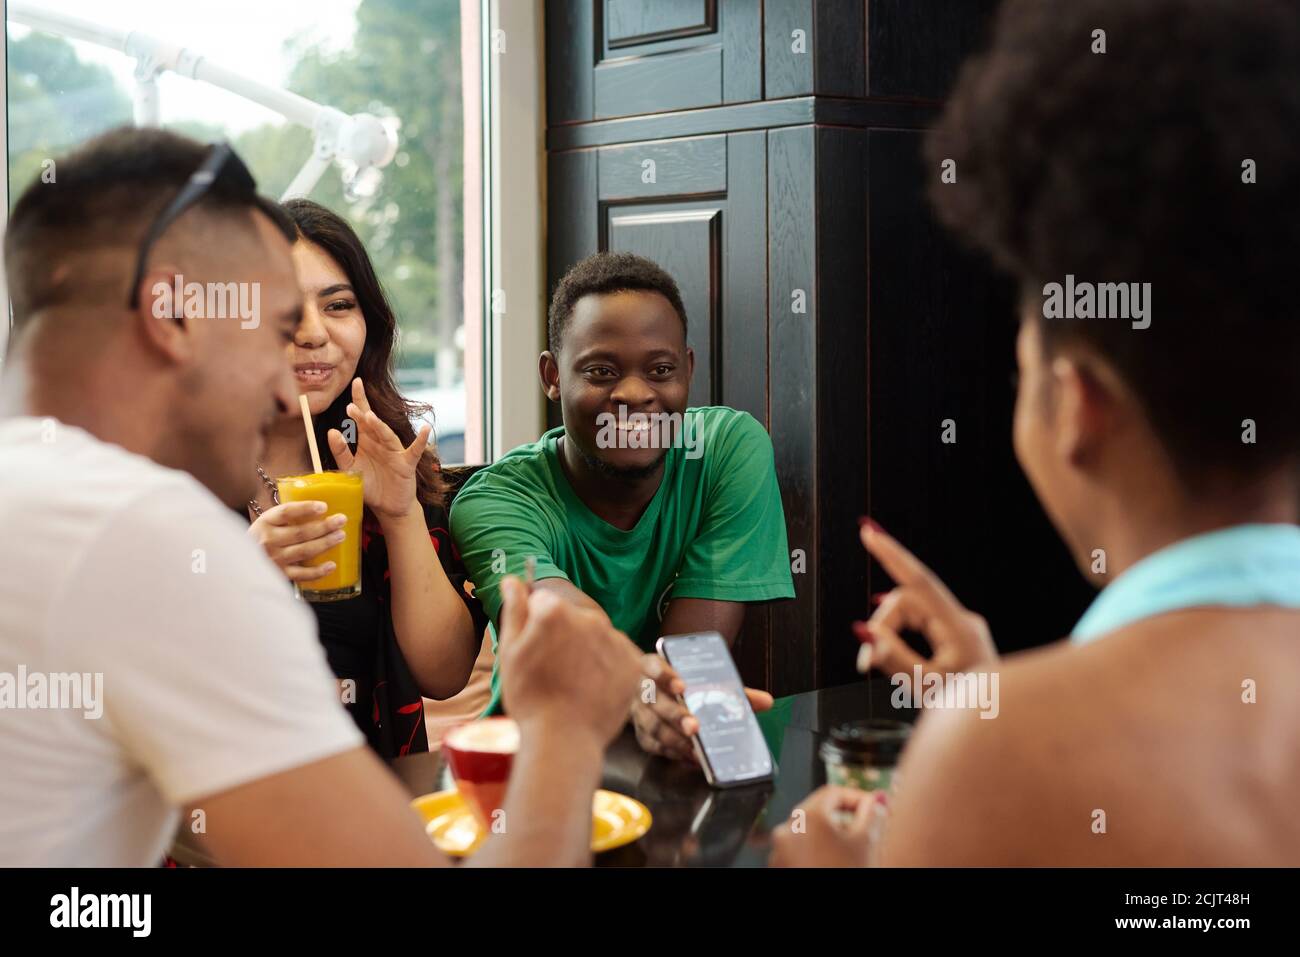 Young black man showing something on the phone screen to his friends while sitting in a cafe. Stock Photo